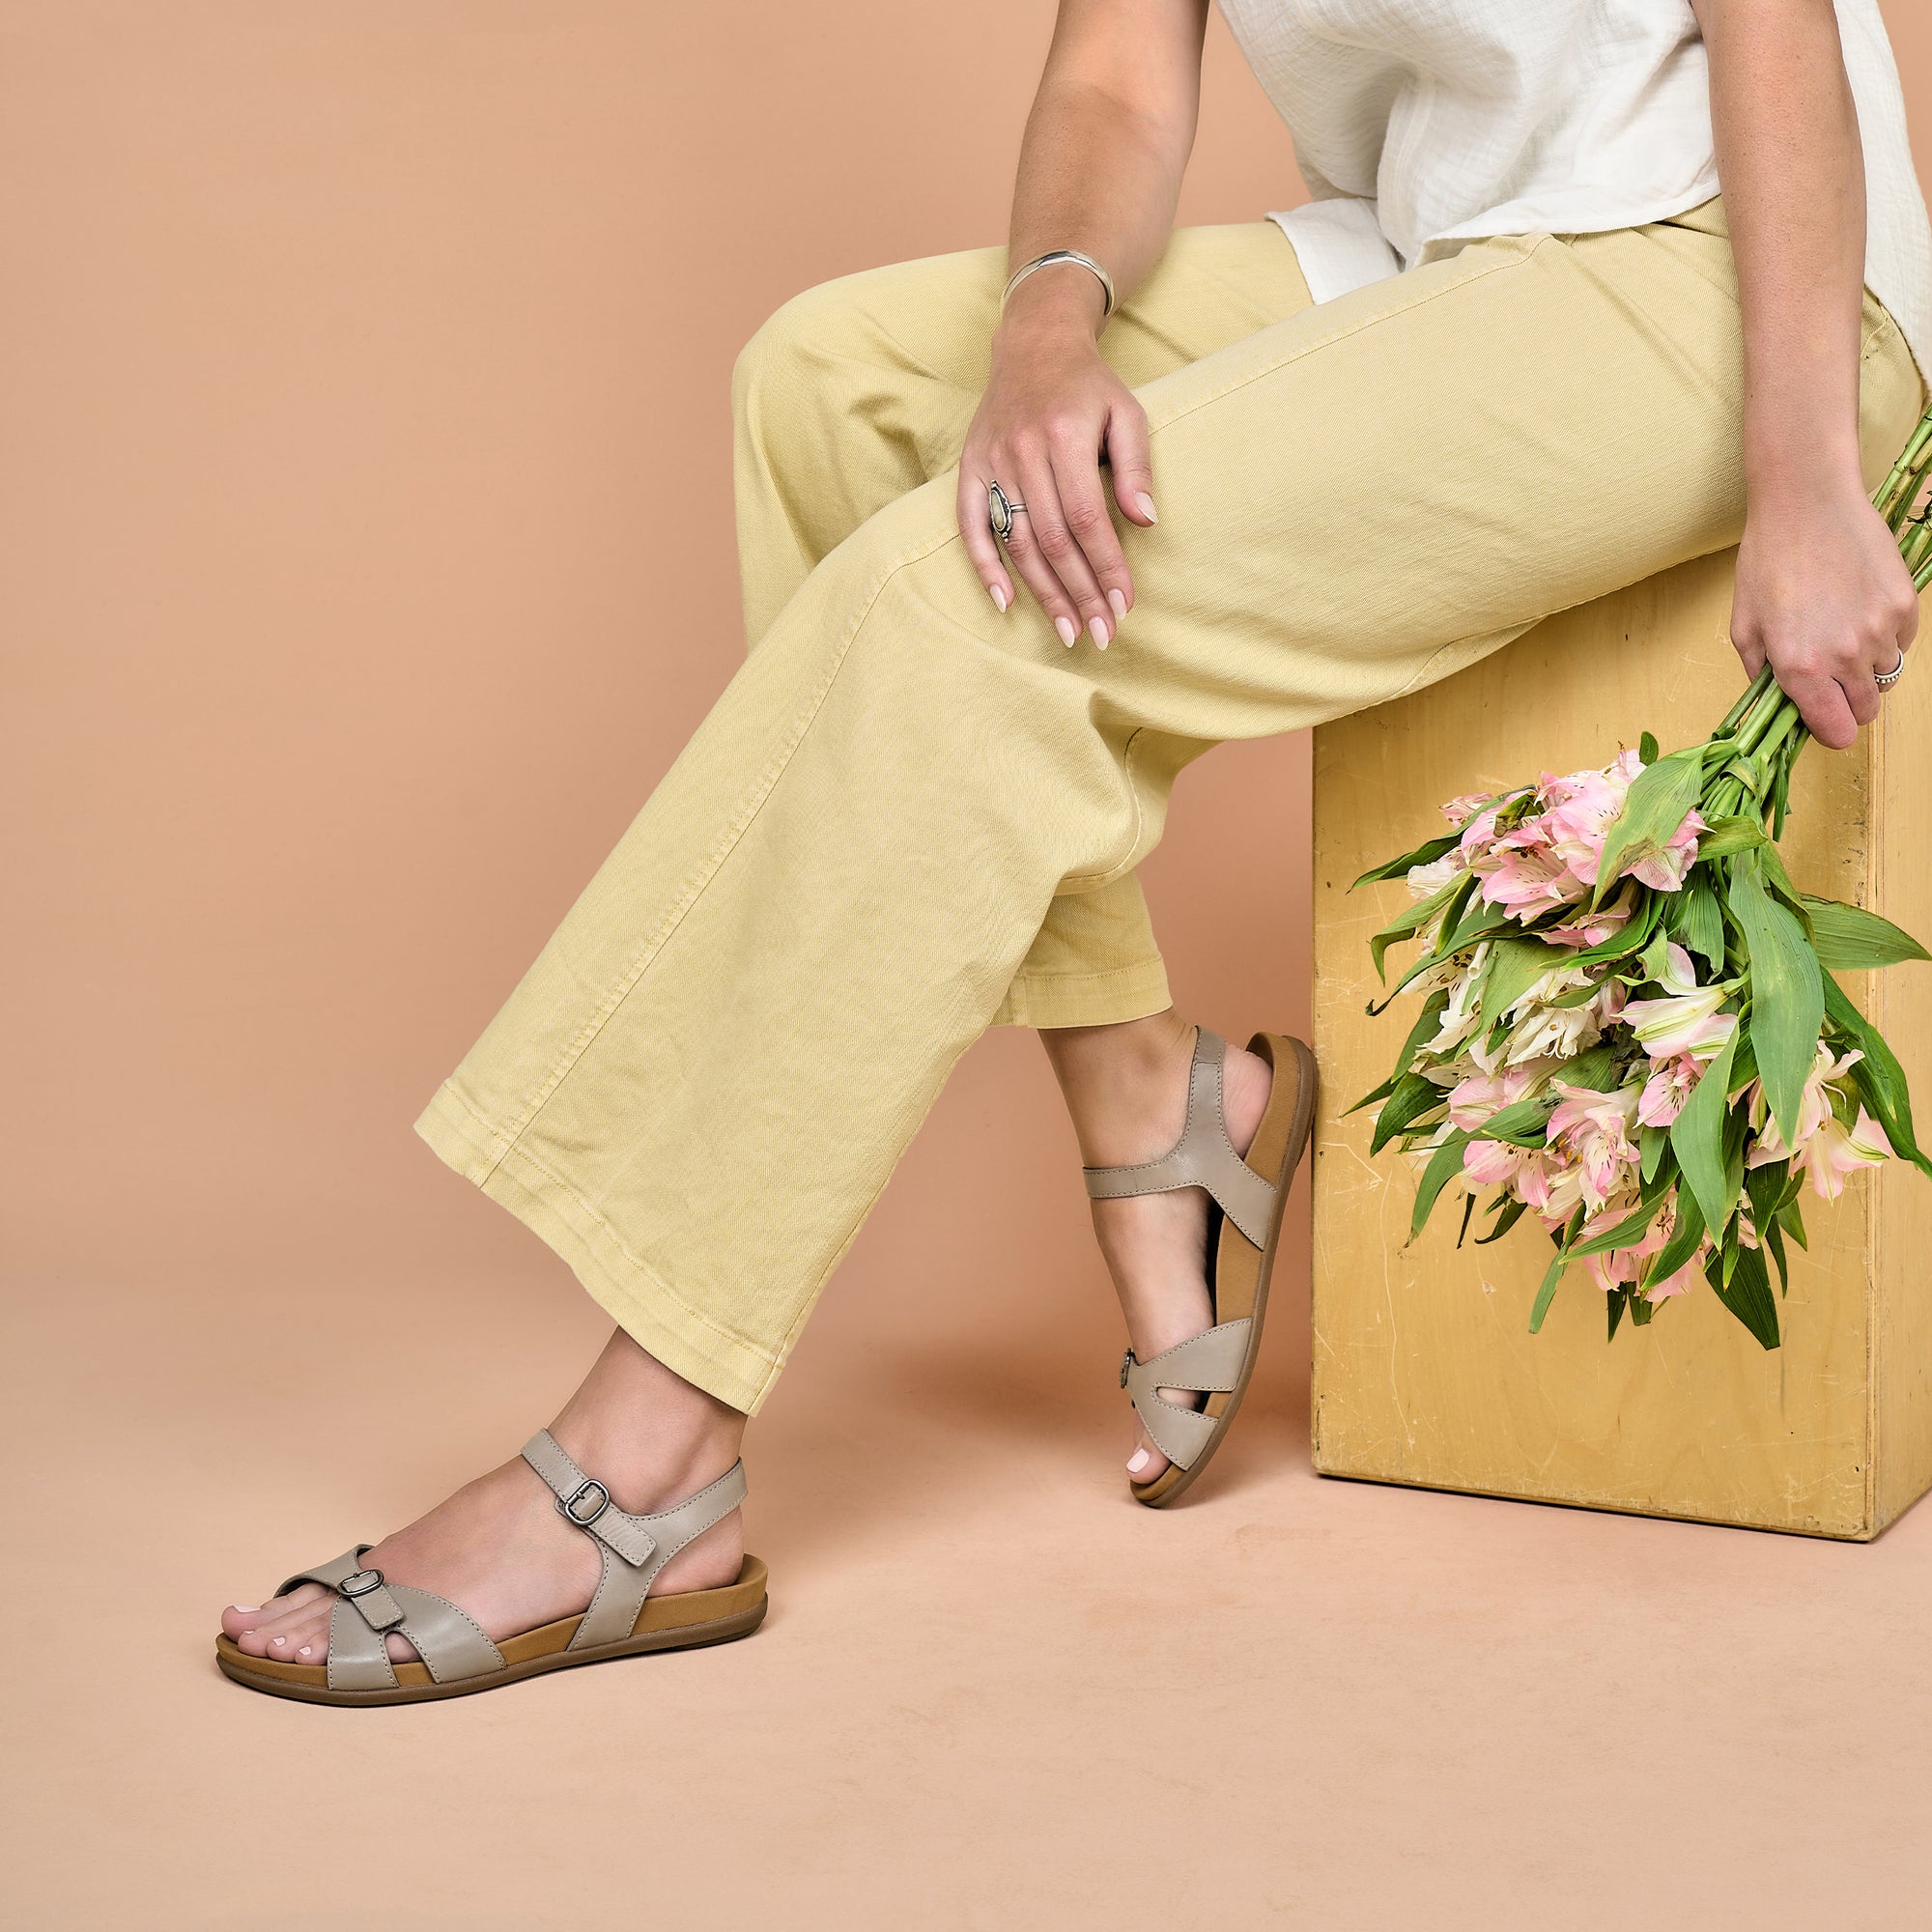 A woman sitting and holding flowers while wearing stone leather flat sandals.